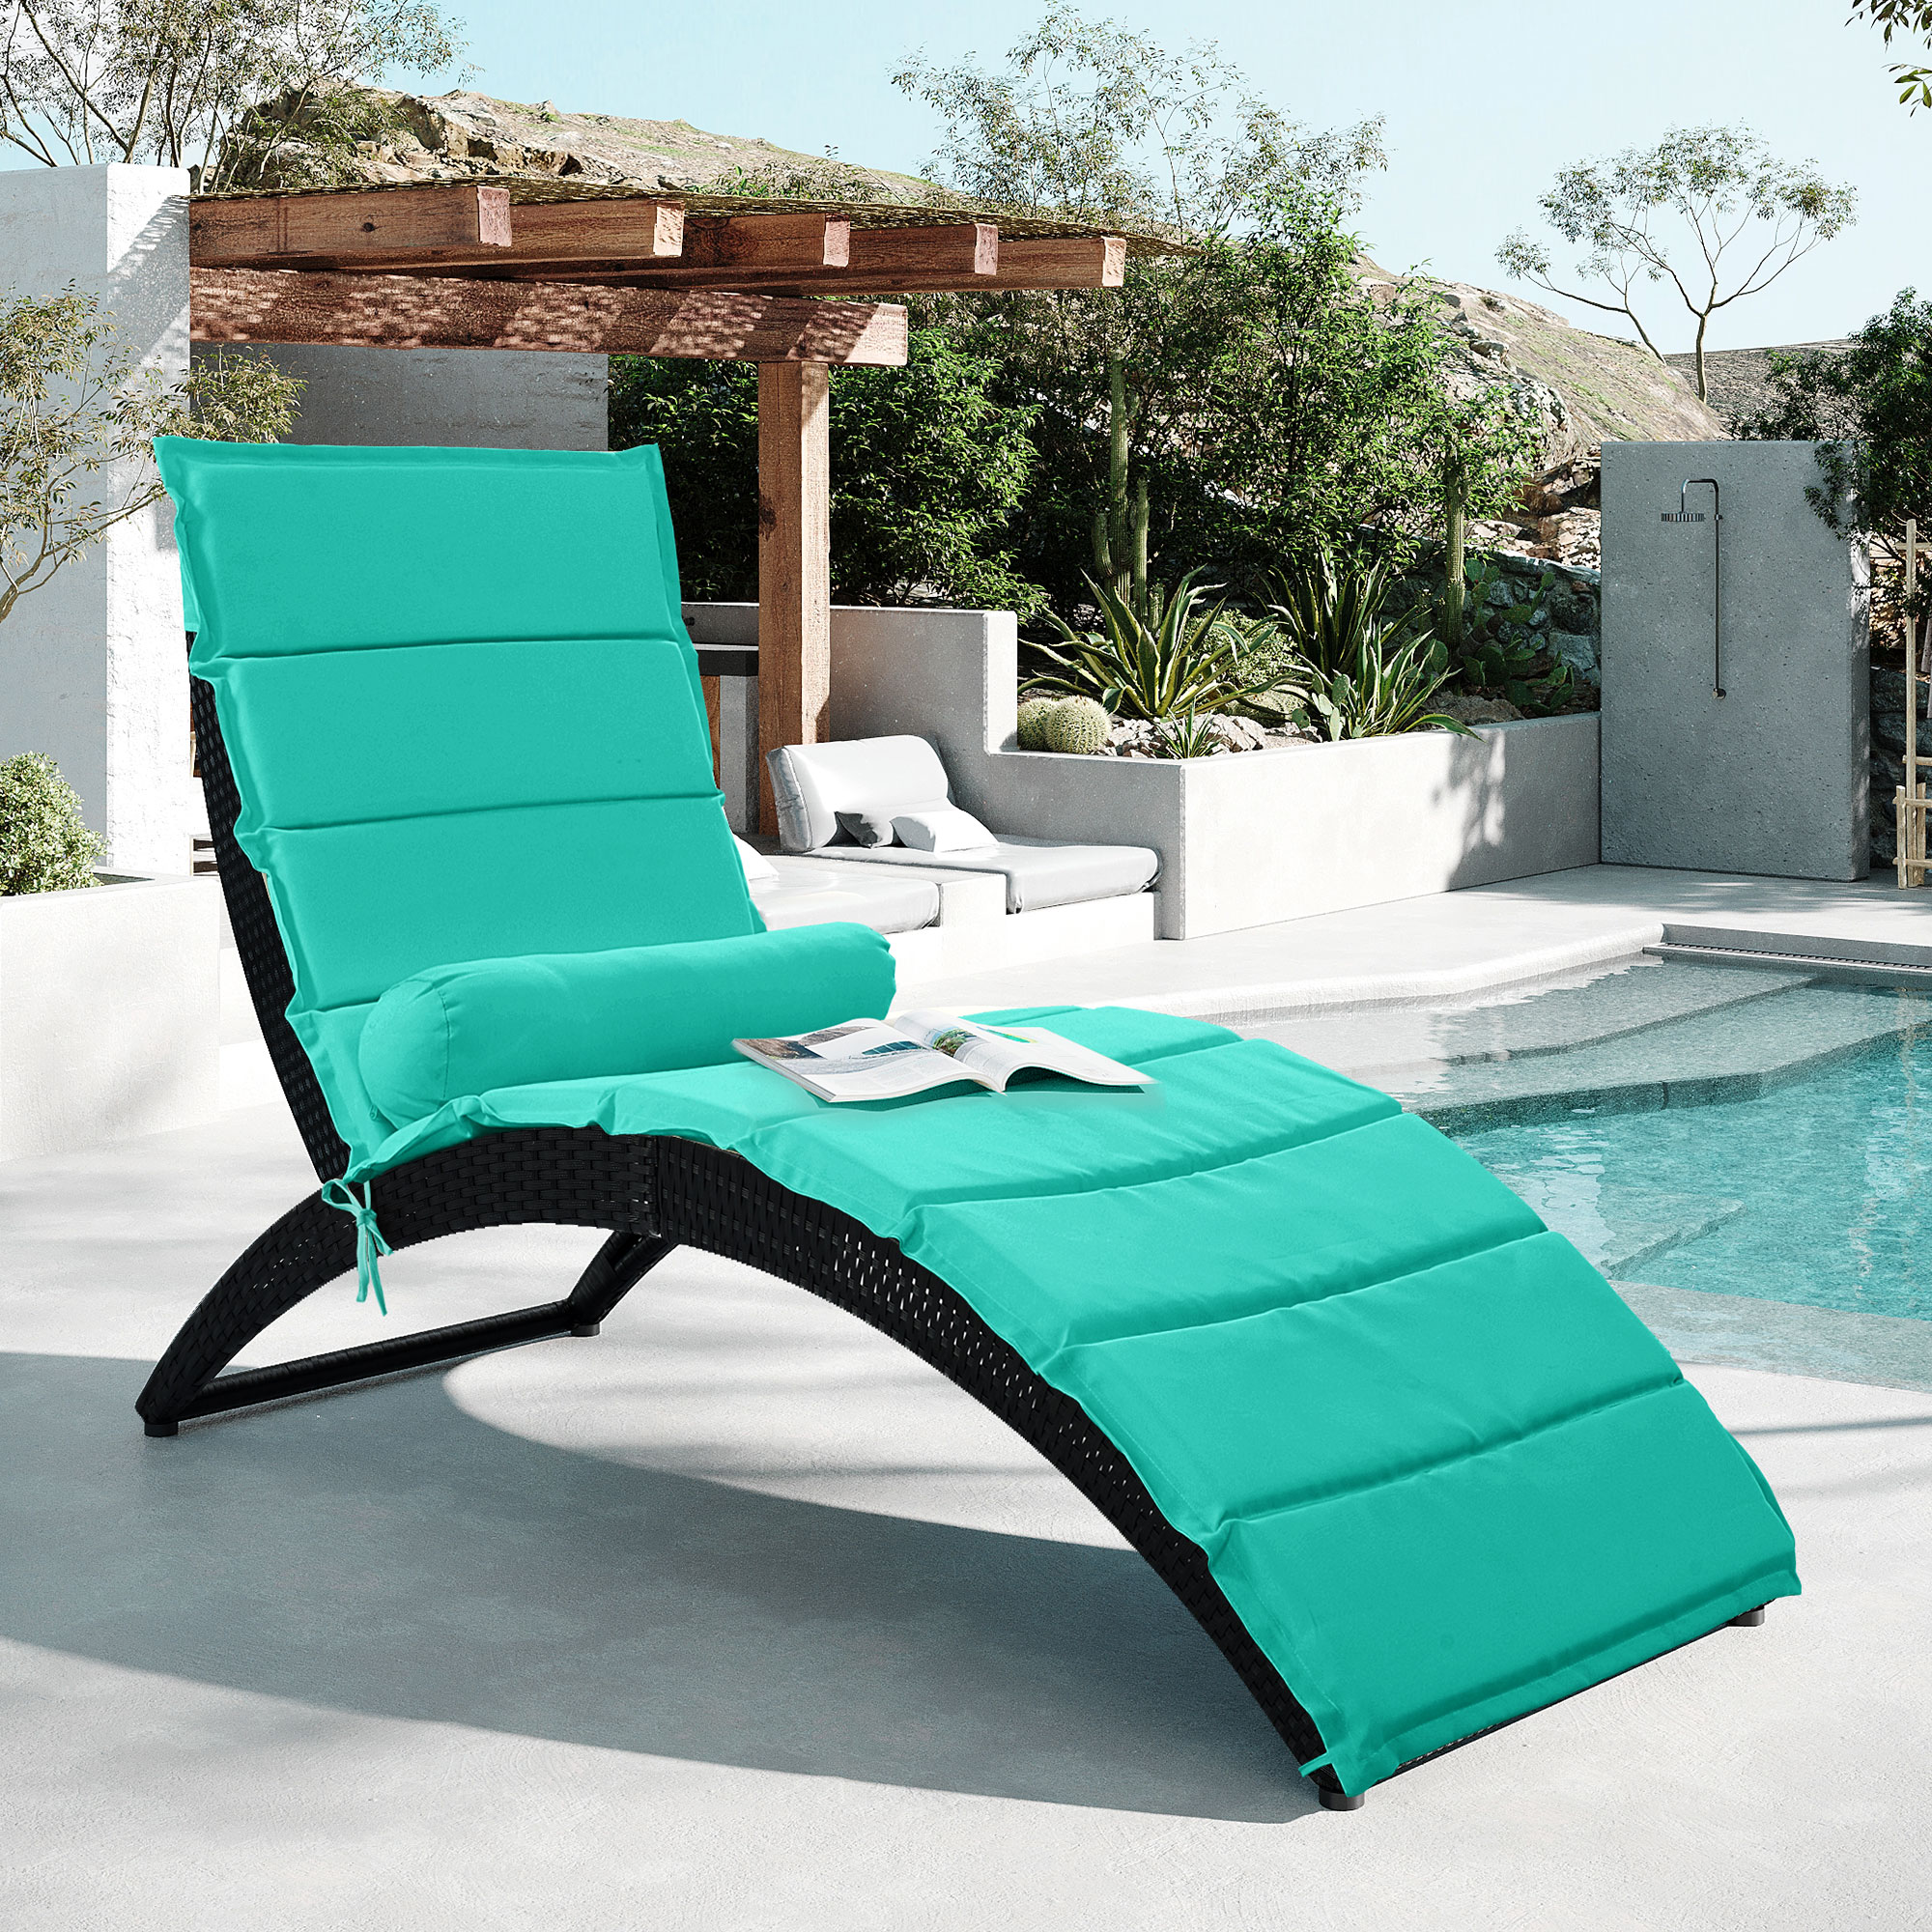 BTMWAY Outdoor Wicker Chaise Lounge, All-Weather Rattan Lounge Chair with Cushion and Head Pillow, Patio Furniture Sun Lounger Foldable Chaise Lounger, Folding Sunbed Tanning Recliner for Beach Pool - image 2 of 11